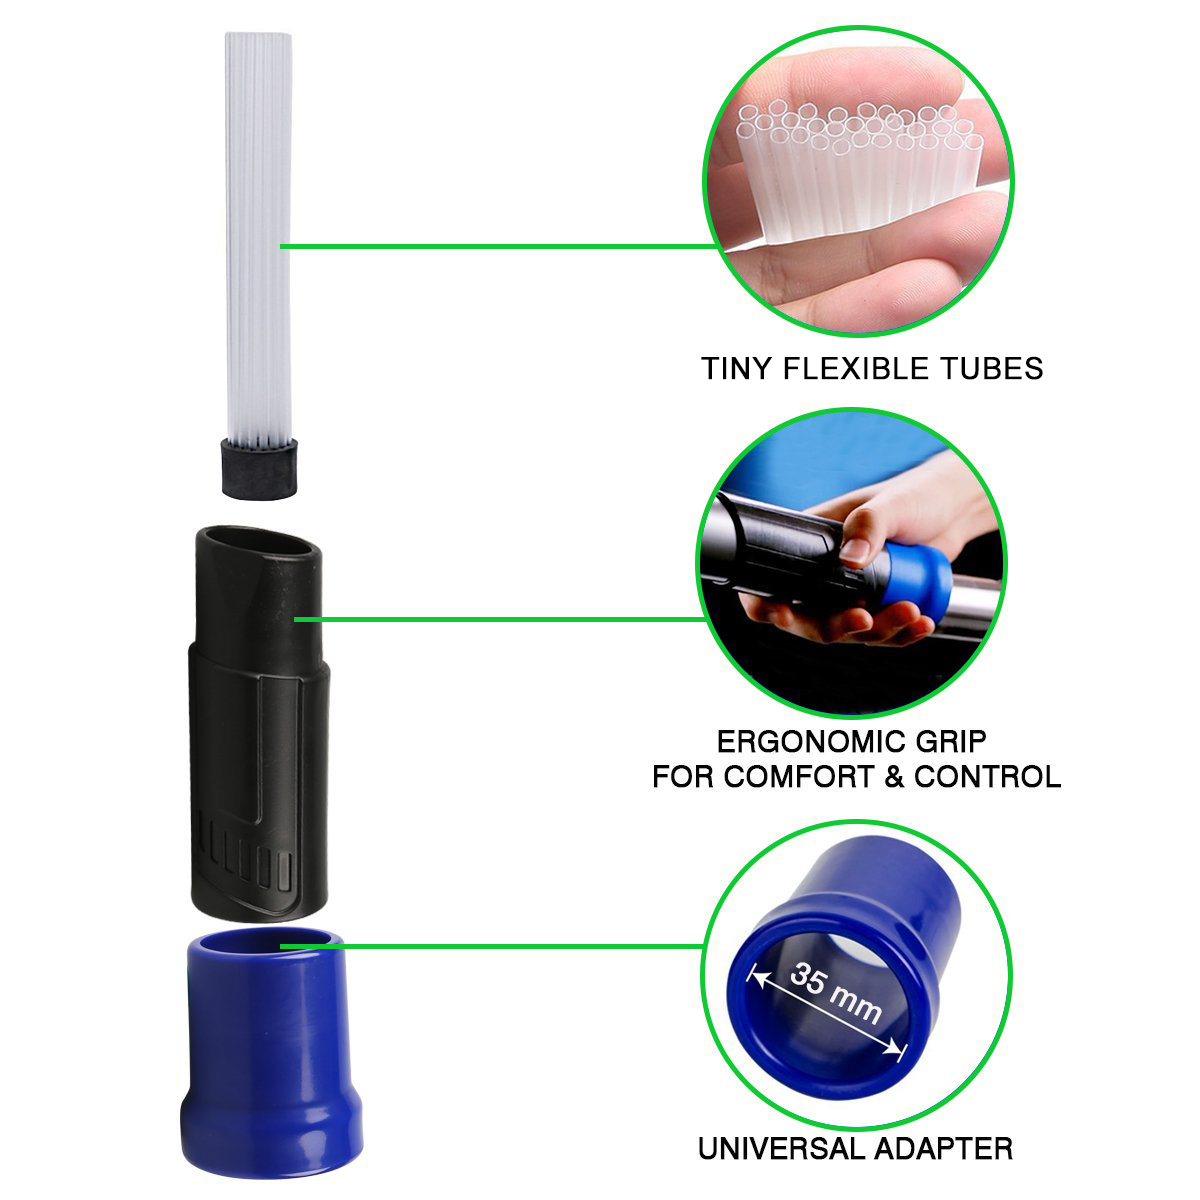 Dust Brush Cleaner，AOBETAK Easy Use as Tv shows, Universal Vacuum Attachment Dirt Remover, Dust Pro Cleaning Sweeper for Air Vents/Keyboards/Drawers/Car/Crafts/Jewelry/Plants